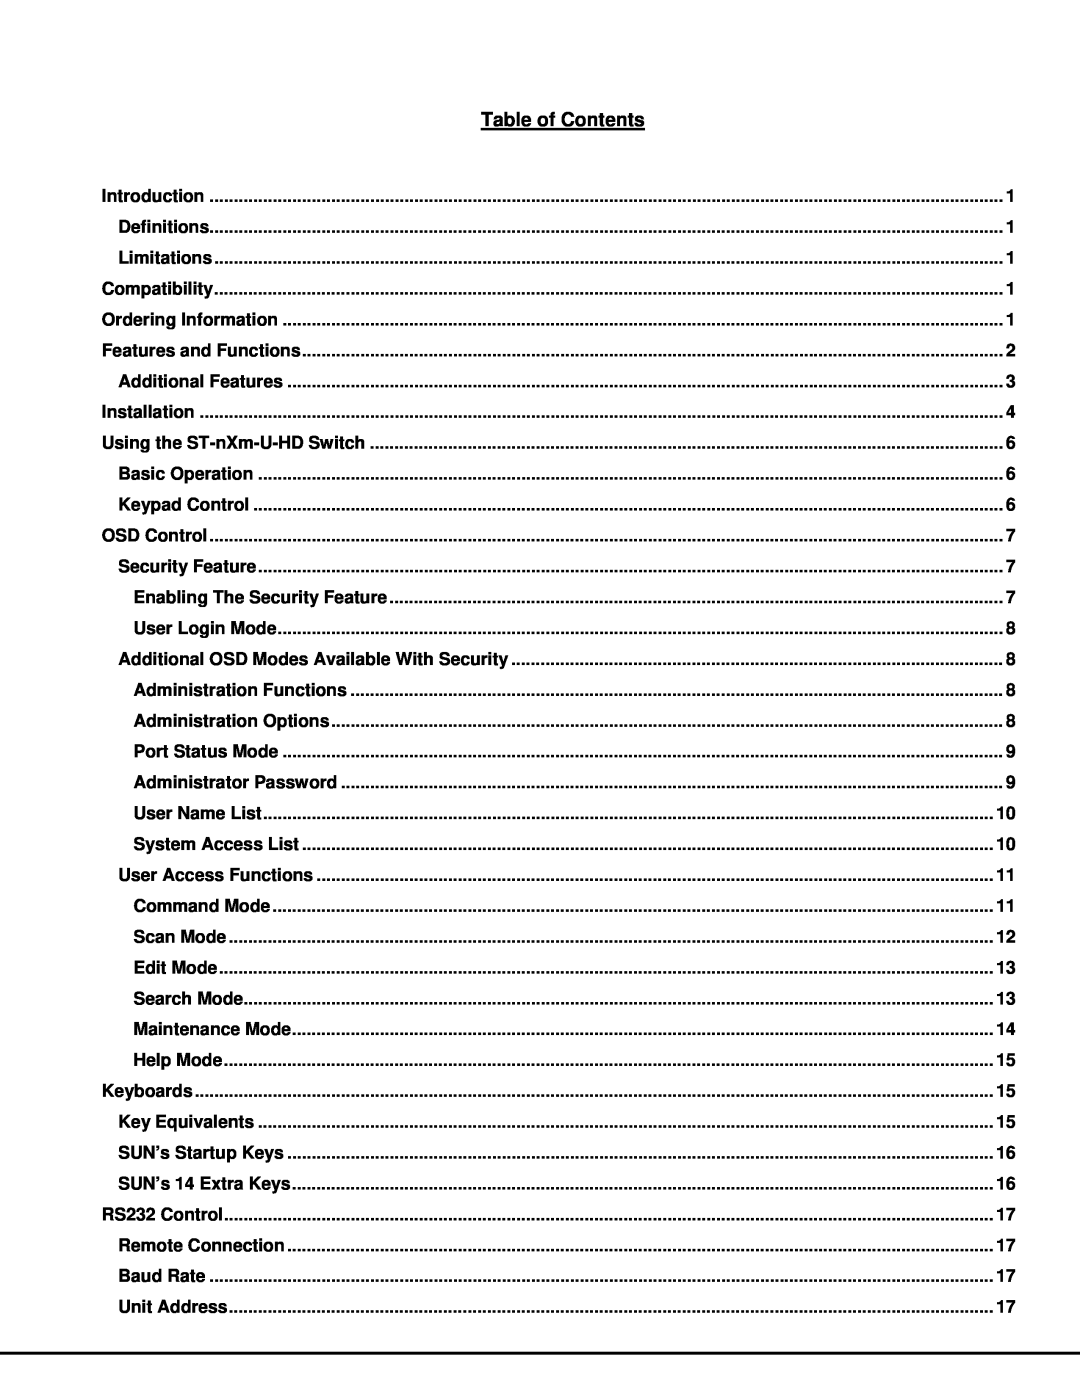 Network Technologies ST-NXM-U-HD manual Table of Contents 